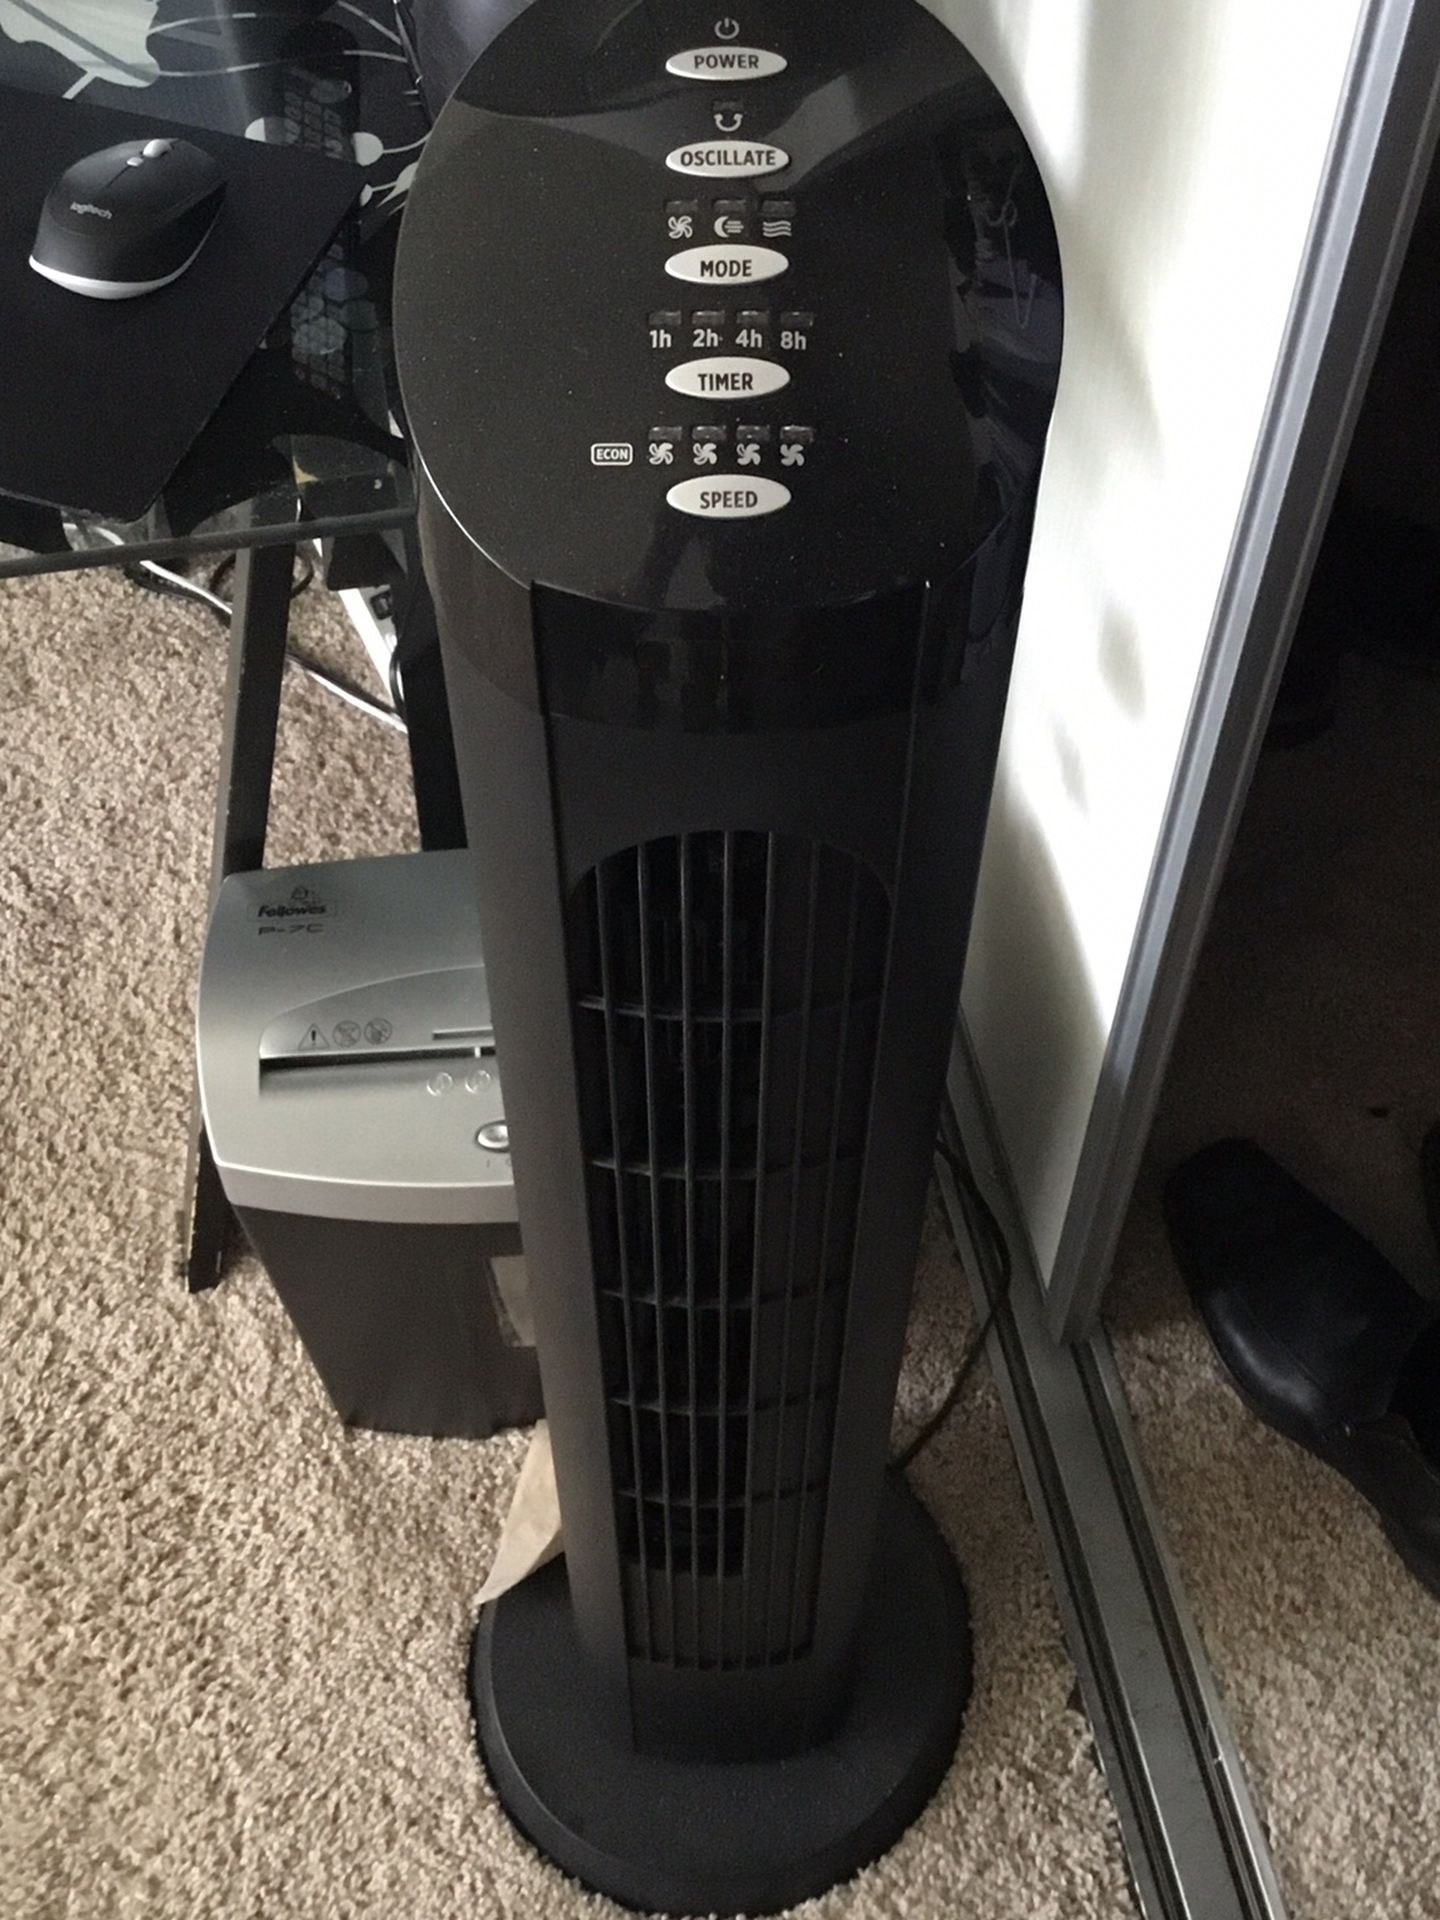 2 Tower Fans For Sale -in Perfect Working Condition